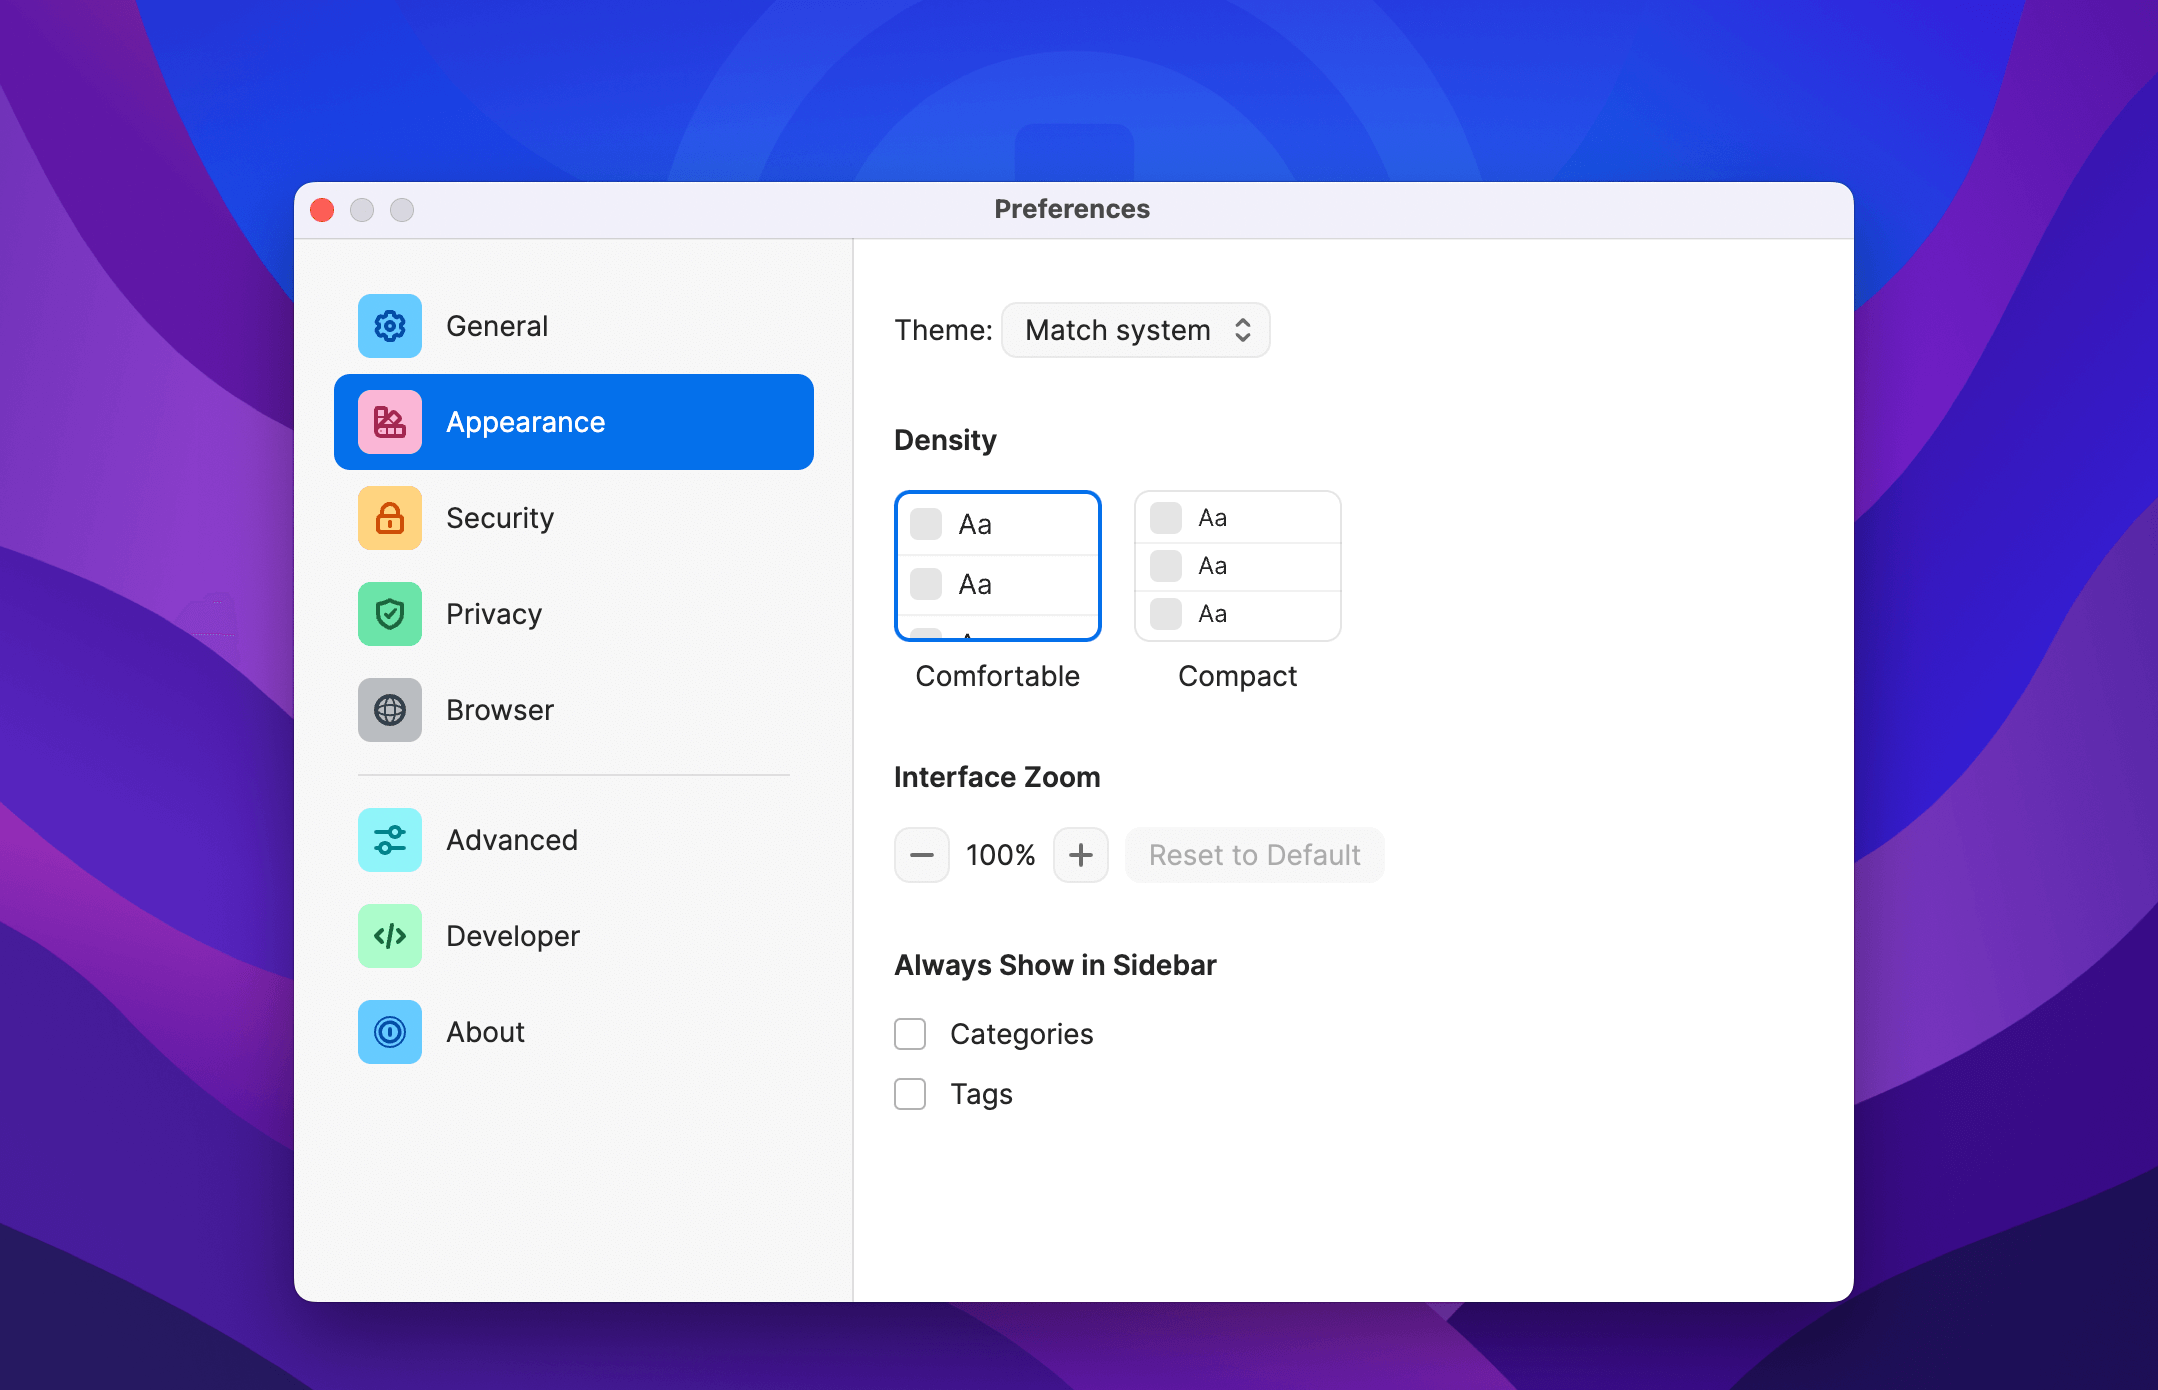 1Password preferences window, open on the Appearance tab with the new Density and Interface Zoom settings shown